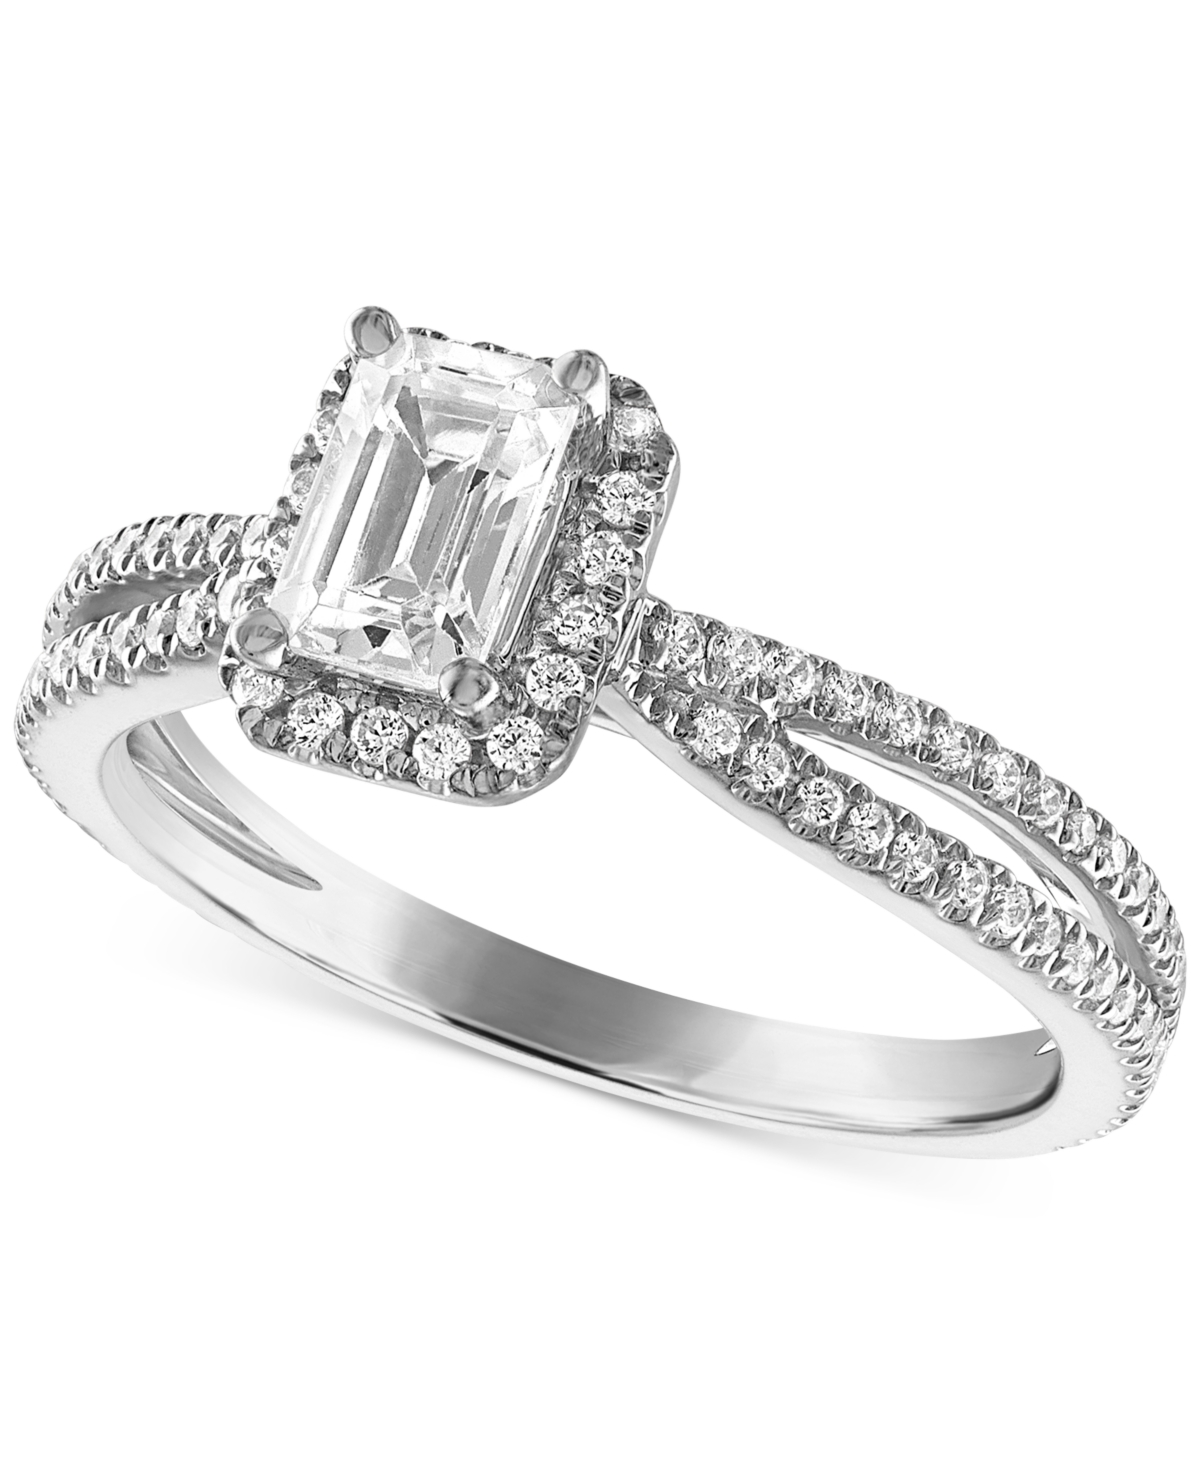 Certified Diamond Emerald-Cut Engagement Ring (7/8 ct. t.w.) in 14k White Gold featuring diamonds with the De Beers Code of Origin, Created fo